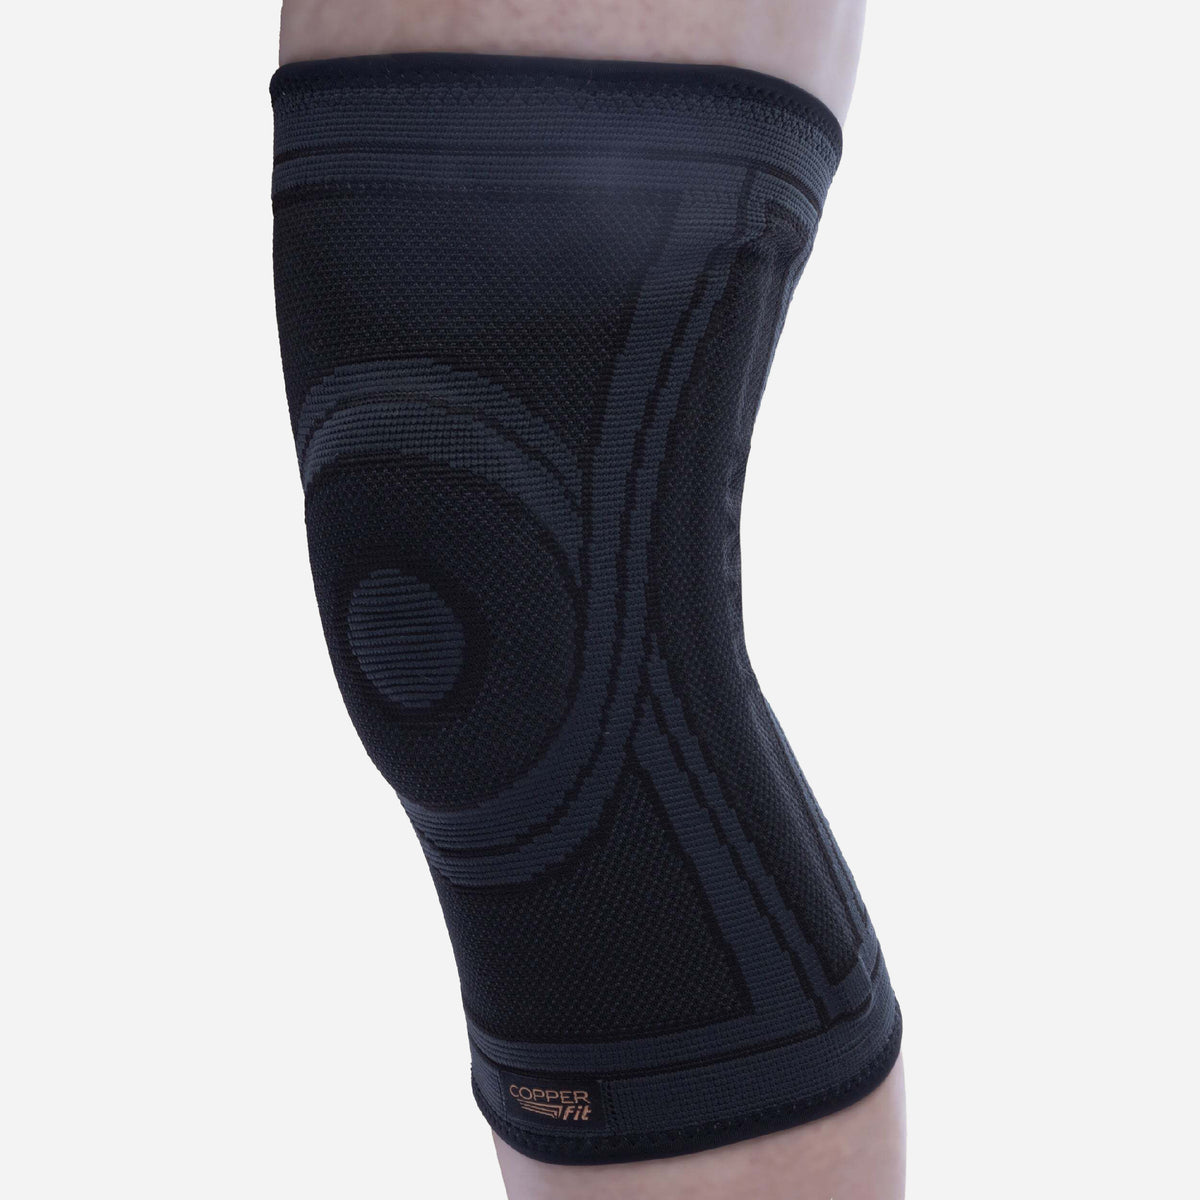 Knee Brace For Arthritis Pain And Support - Copper Knee Sleeve For Knee  Pain Compression Sleeve For Sports, Knee Pain Relief - Braces & Supports -  AliExpress